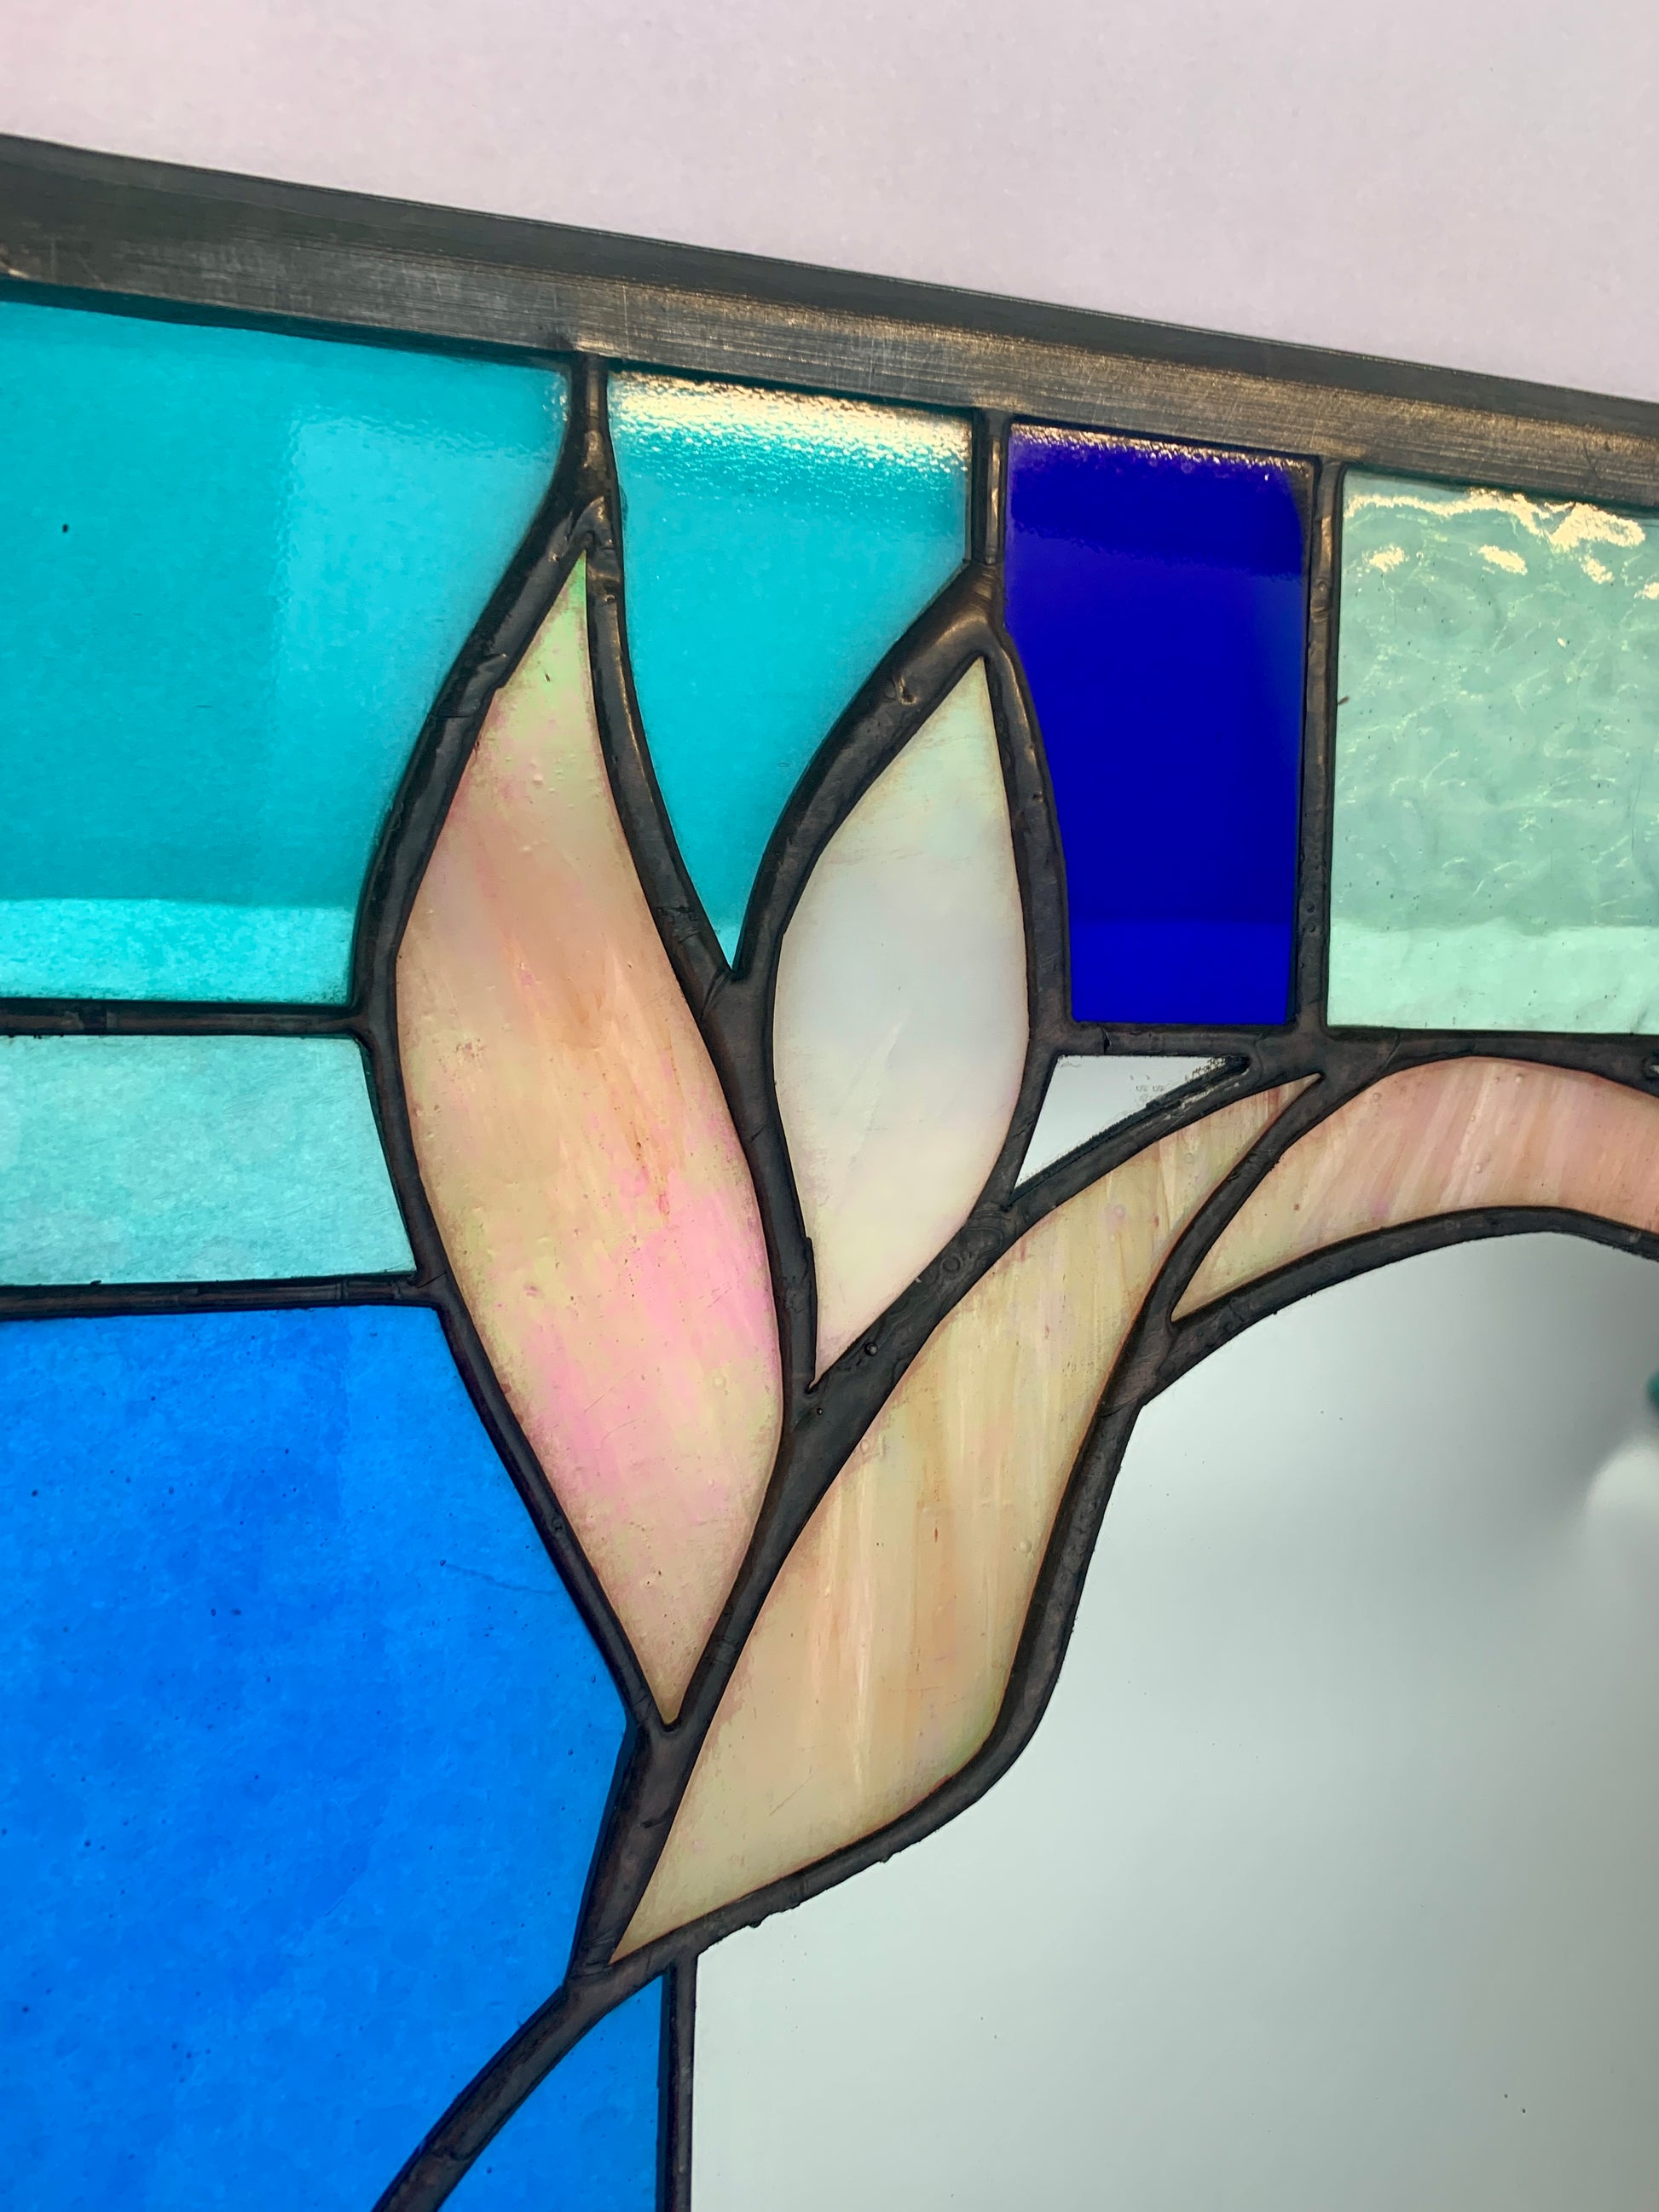 Stained Glass Mirror. Blue and Turquoise border glass; Irridiscent glass floral petals. Made by Dadswell Glass.